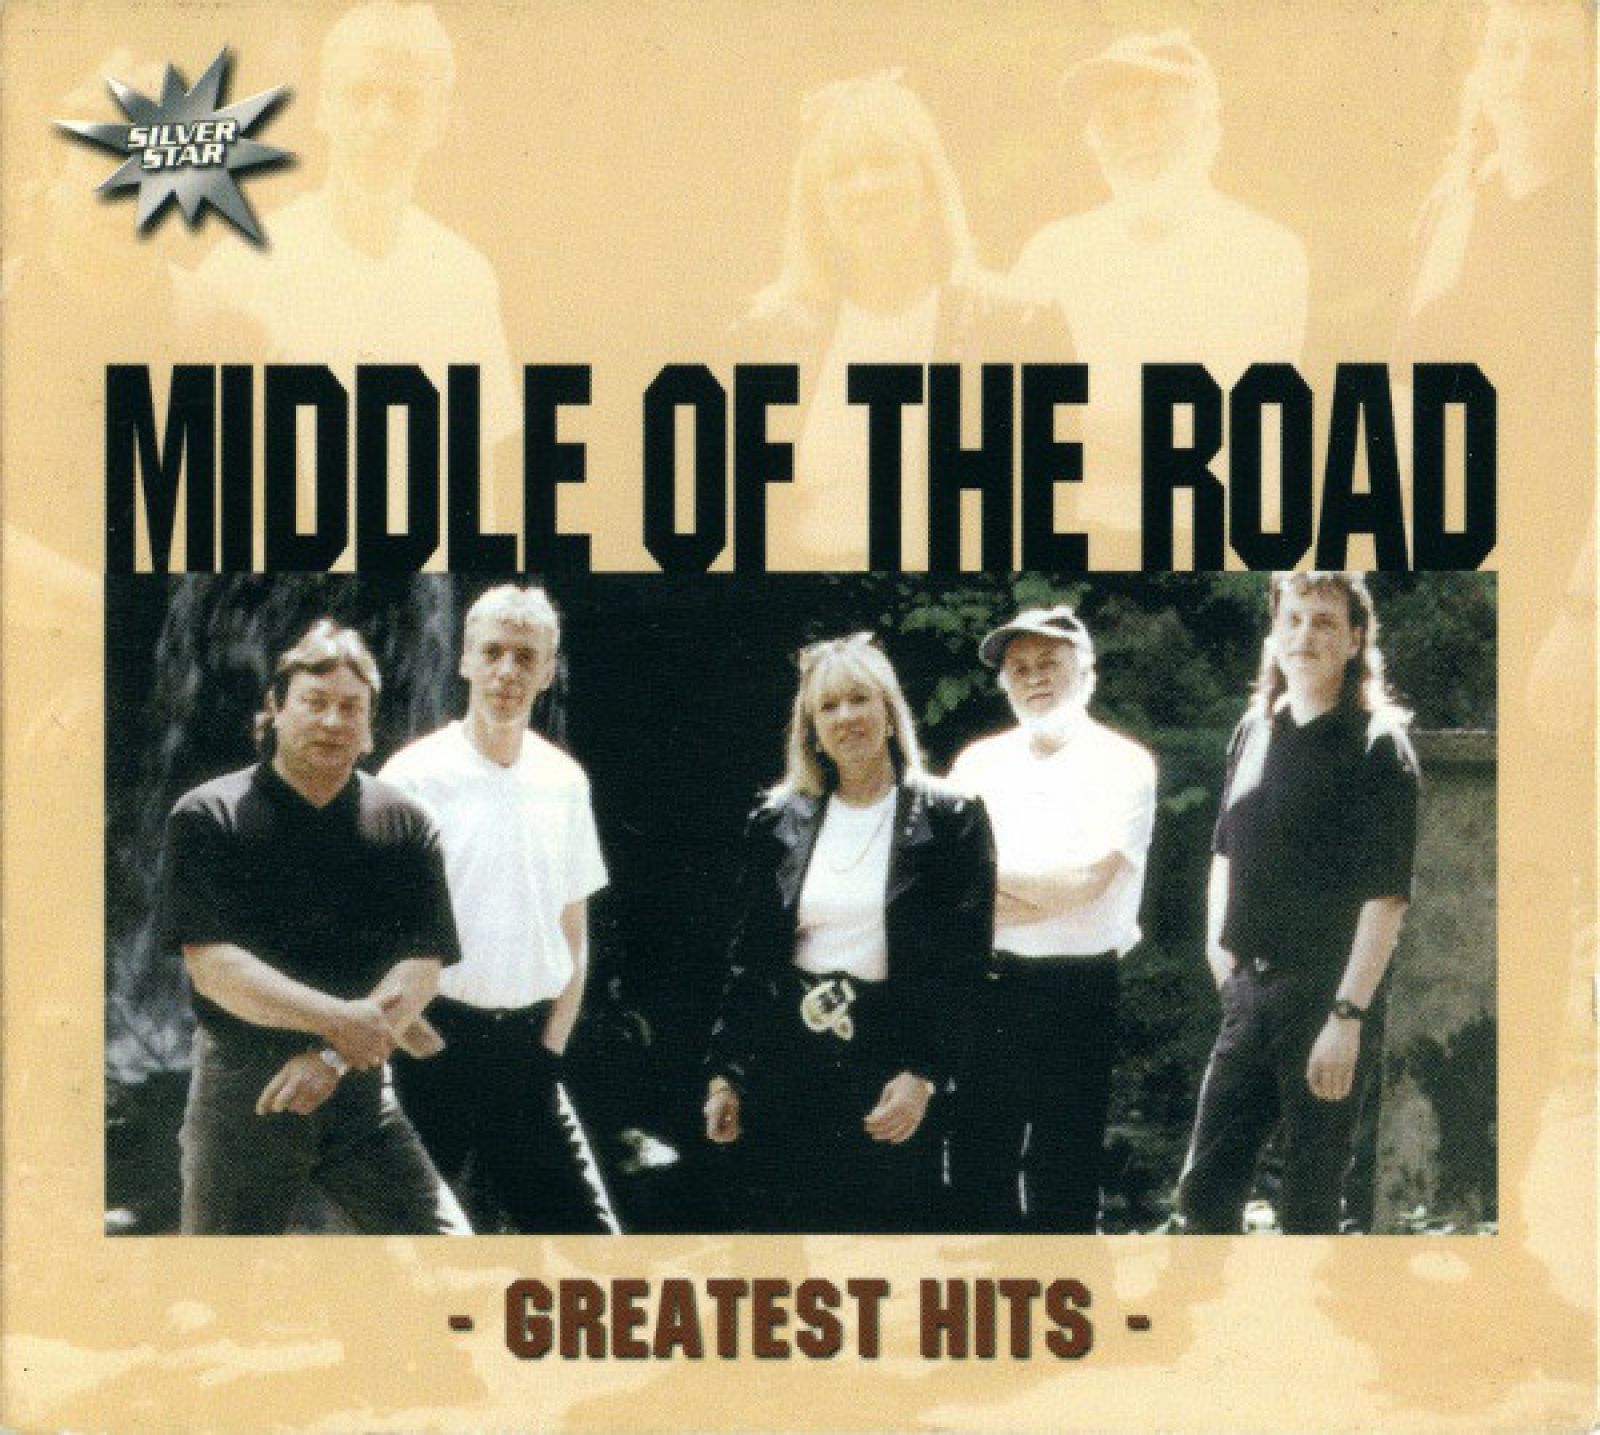 Middle of the road mp3. Middle of the Road '1998 - Greatest Hits. Группа Middle of the Road 1972. Middle of the Road Chirpy Chirpy cheep cheep. Middle of the Road дискография.